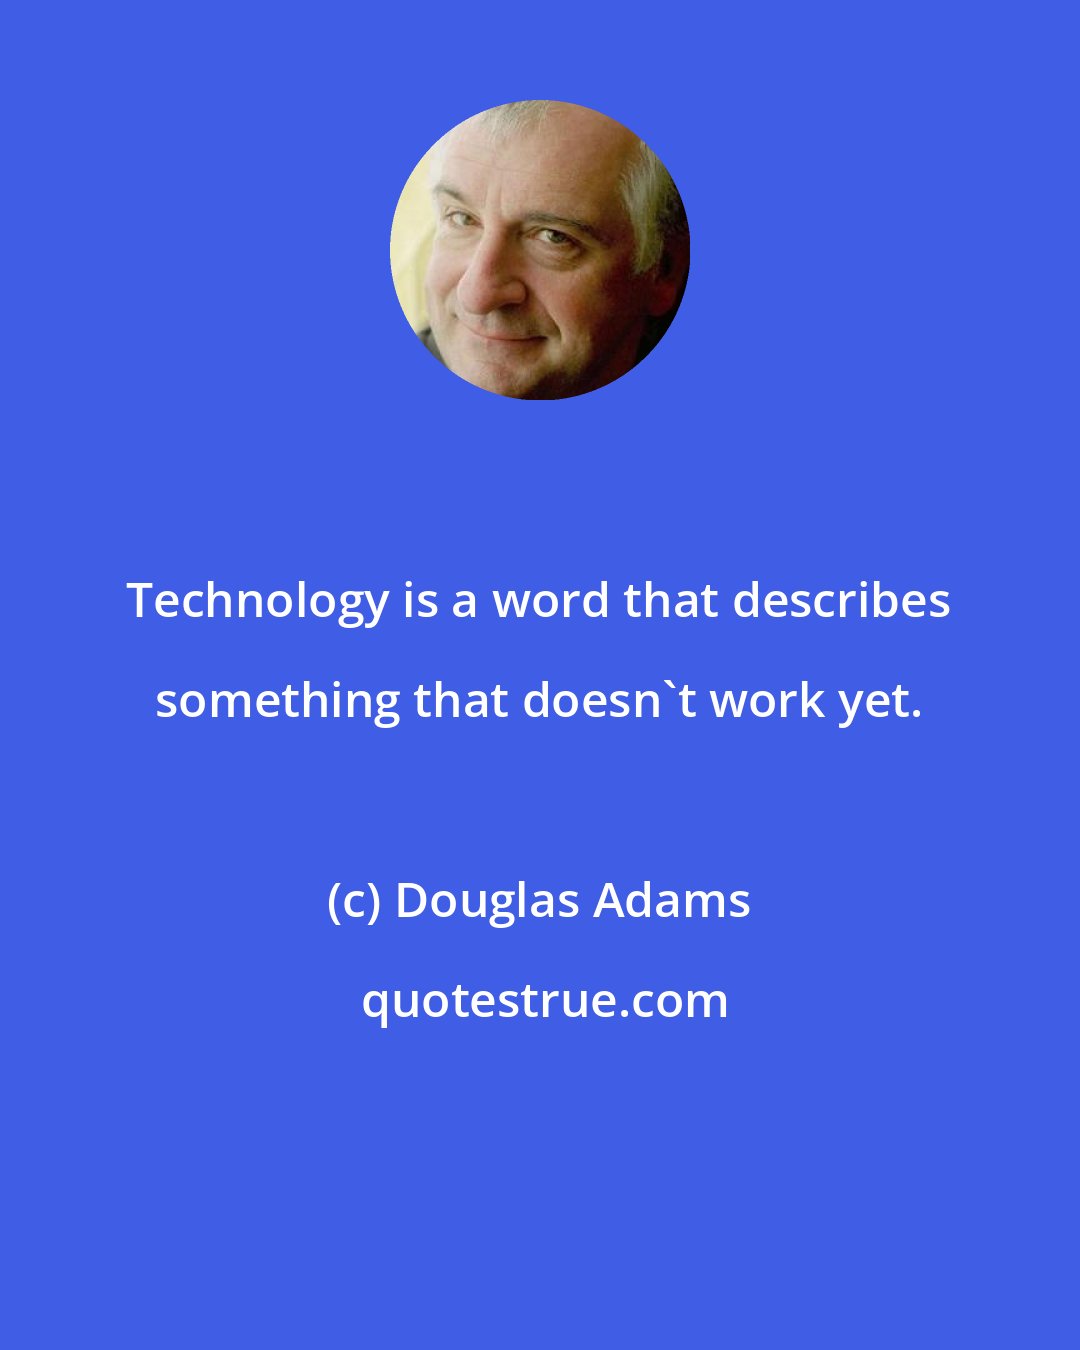 Douglas Adams: Technology is a word that describes something that doesn't work yet.